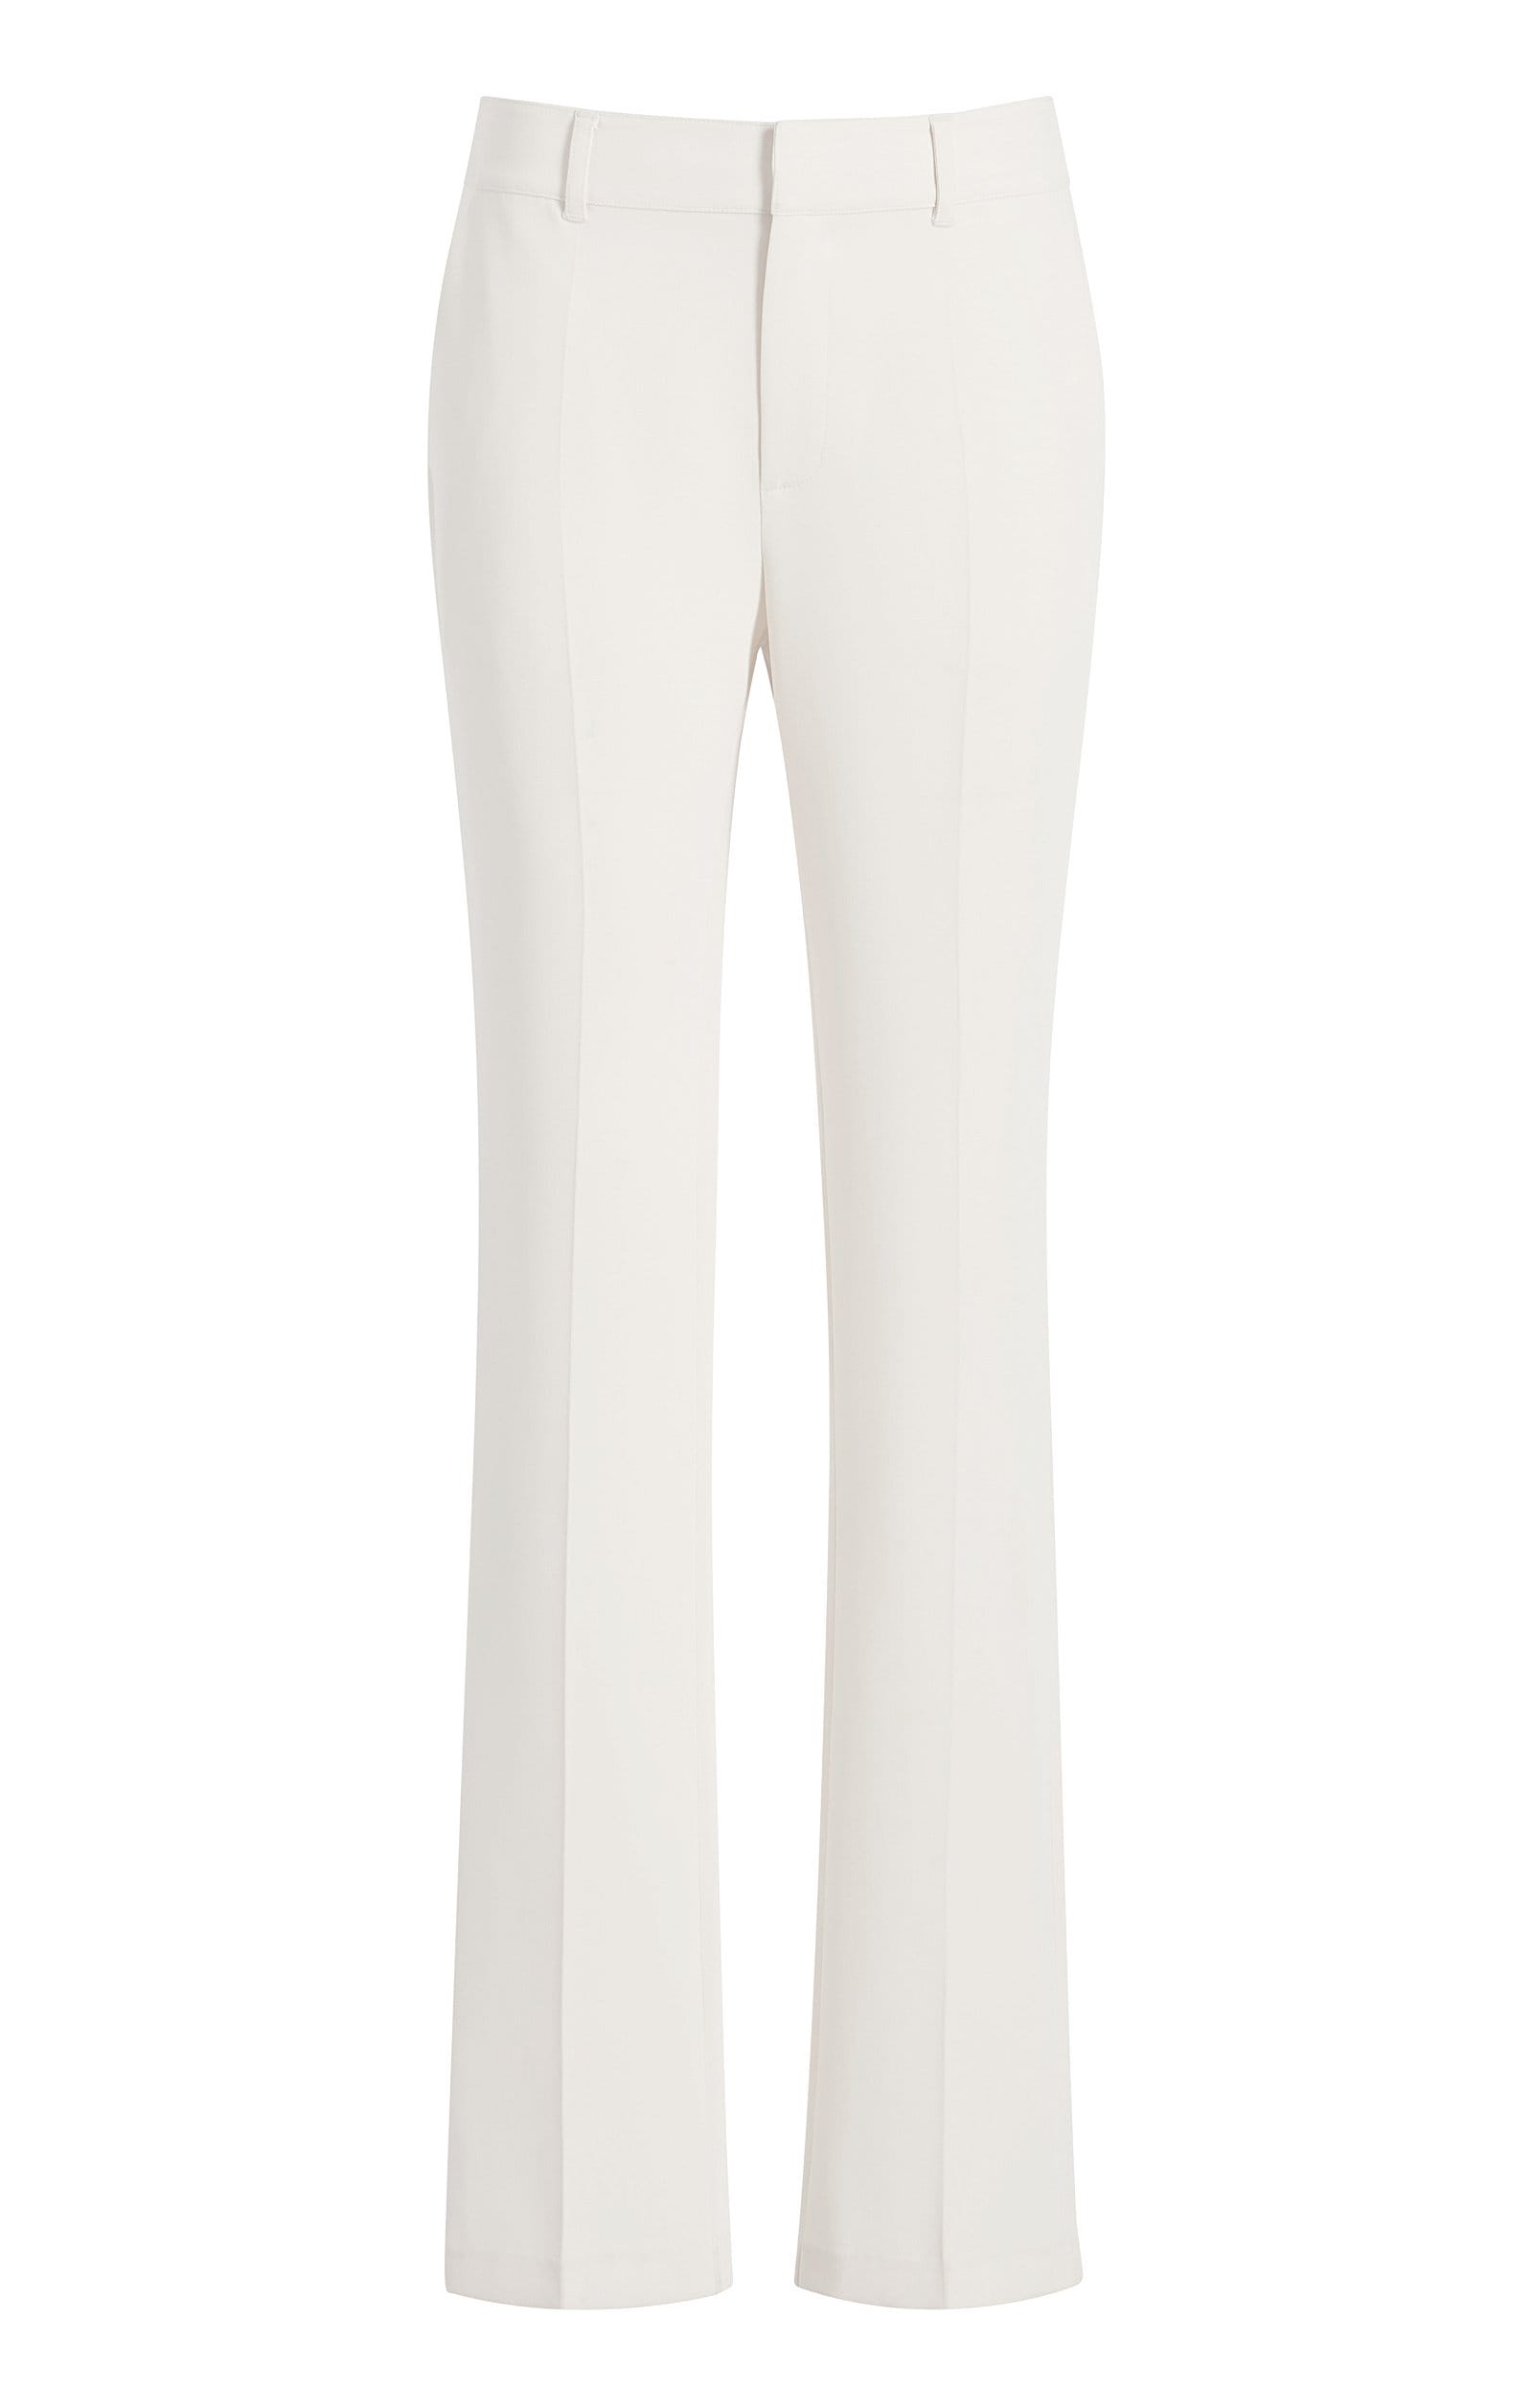 https://cinqasept.nyc/collections/5-a-7-essentials/products/kerry-pant-in-ivory